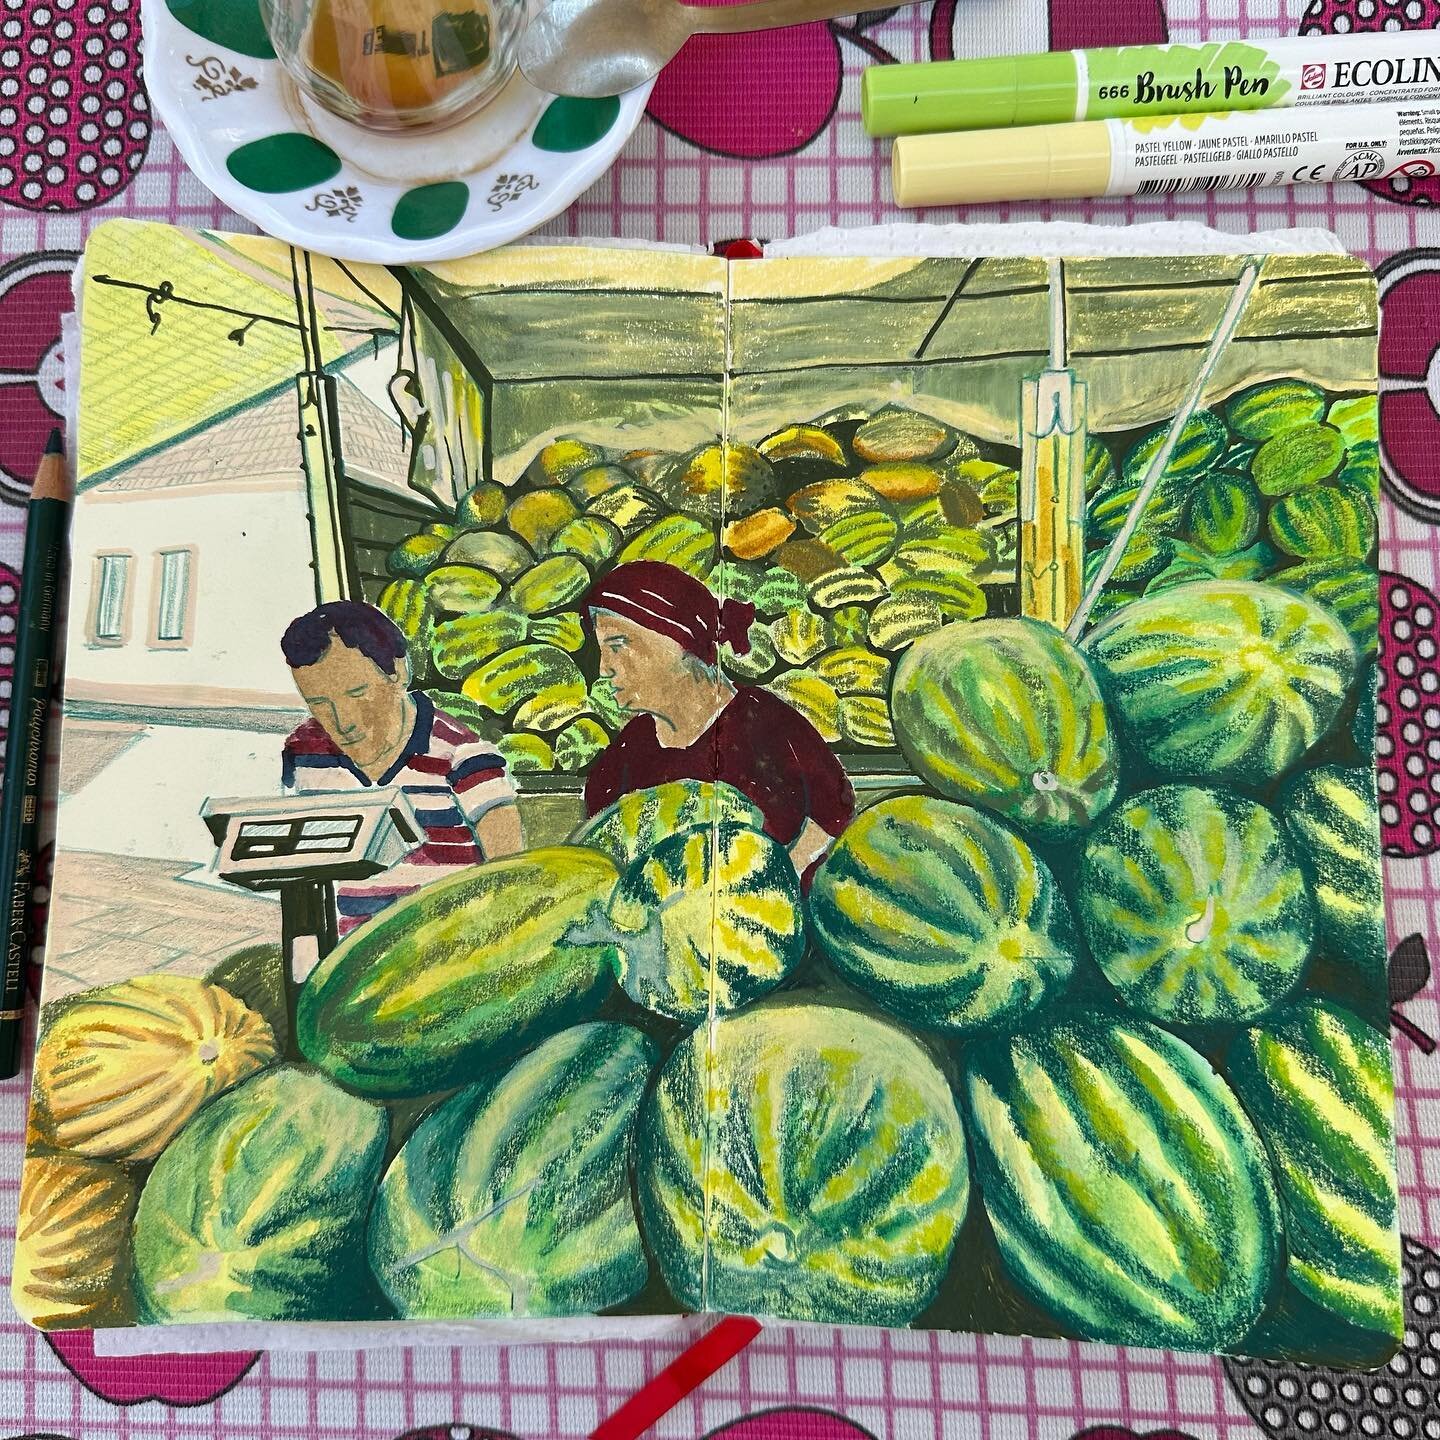 We bought the biggest watermelon I&rsquo;d ever seen from this market stall yesterday. 
It tastes pretty damn good 😋 🍉
&bull;
&bull;
&bull;
#walktosee #observationaldrawing #drawdrawdraw #sketchbookdrawing #sketchbook #locationdrawing #csacbi #csac